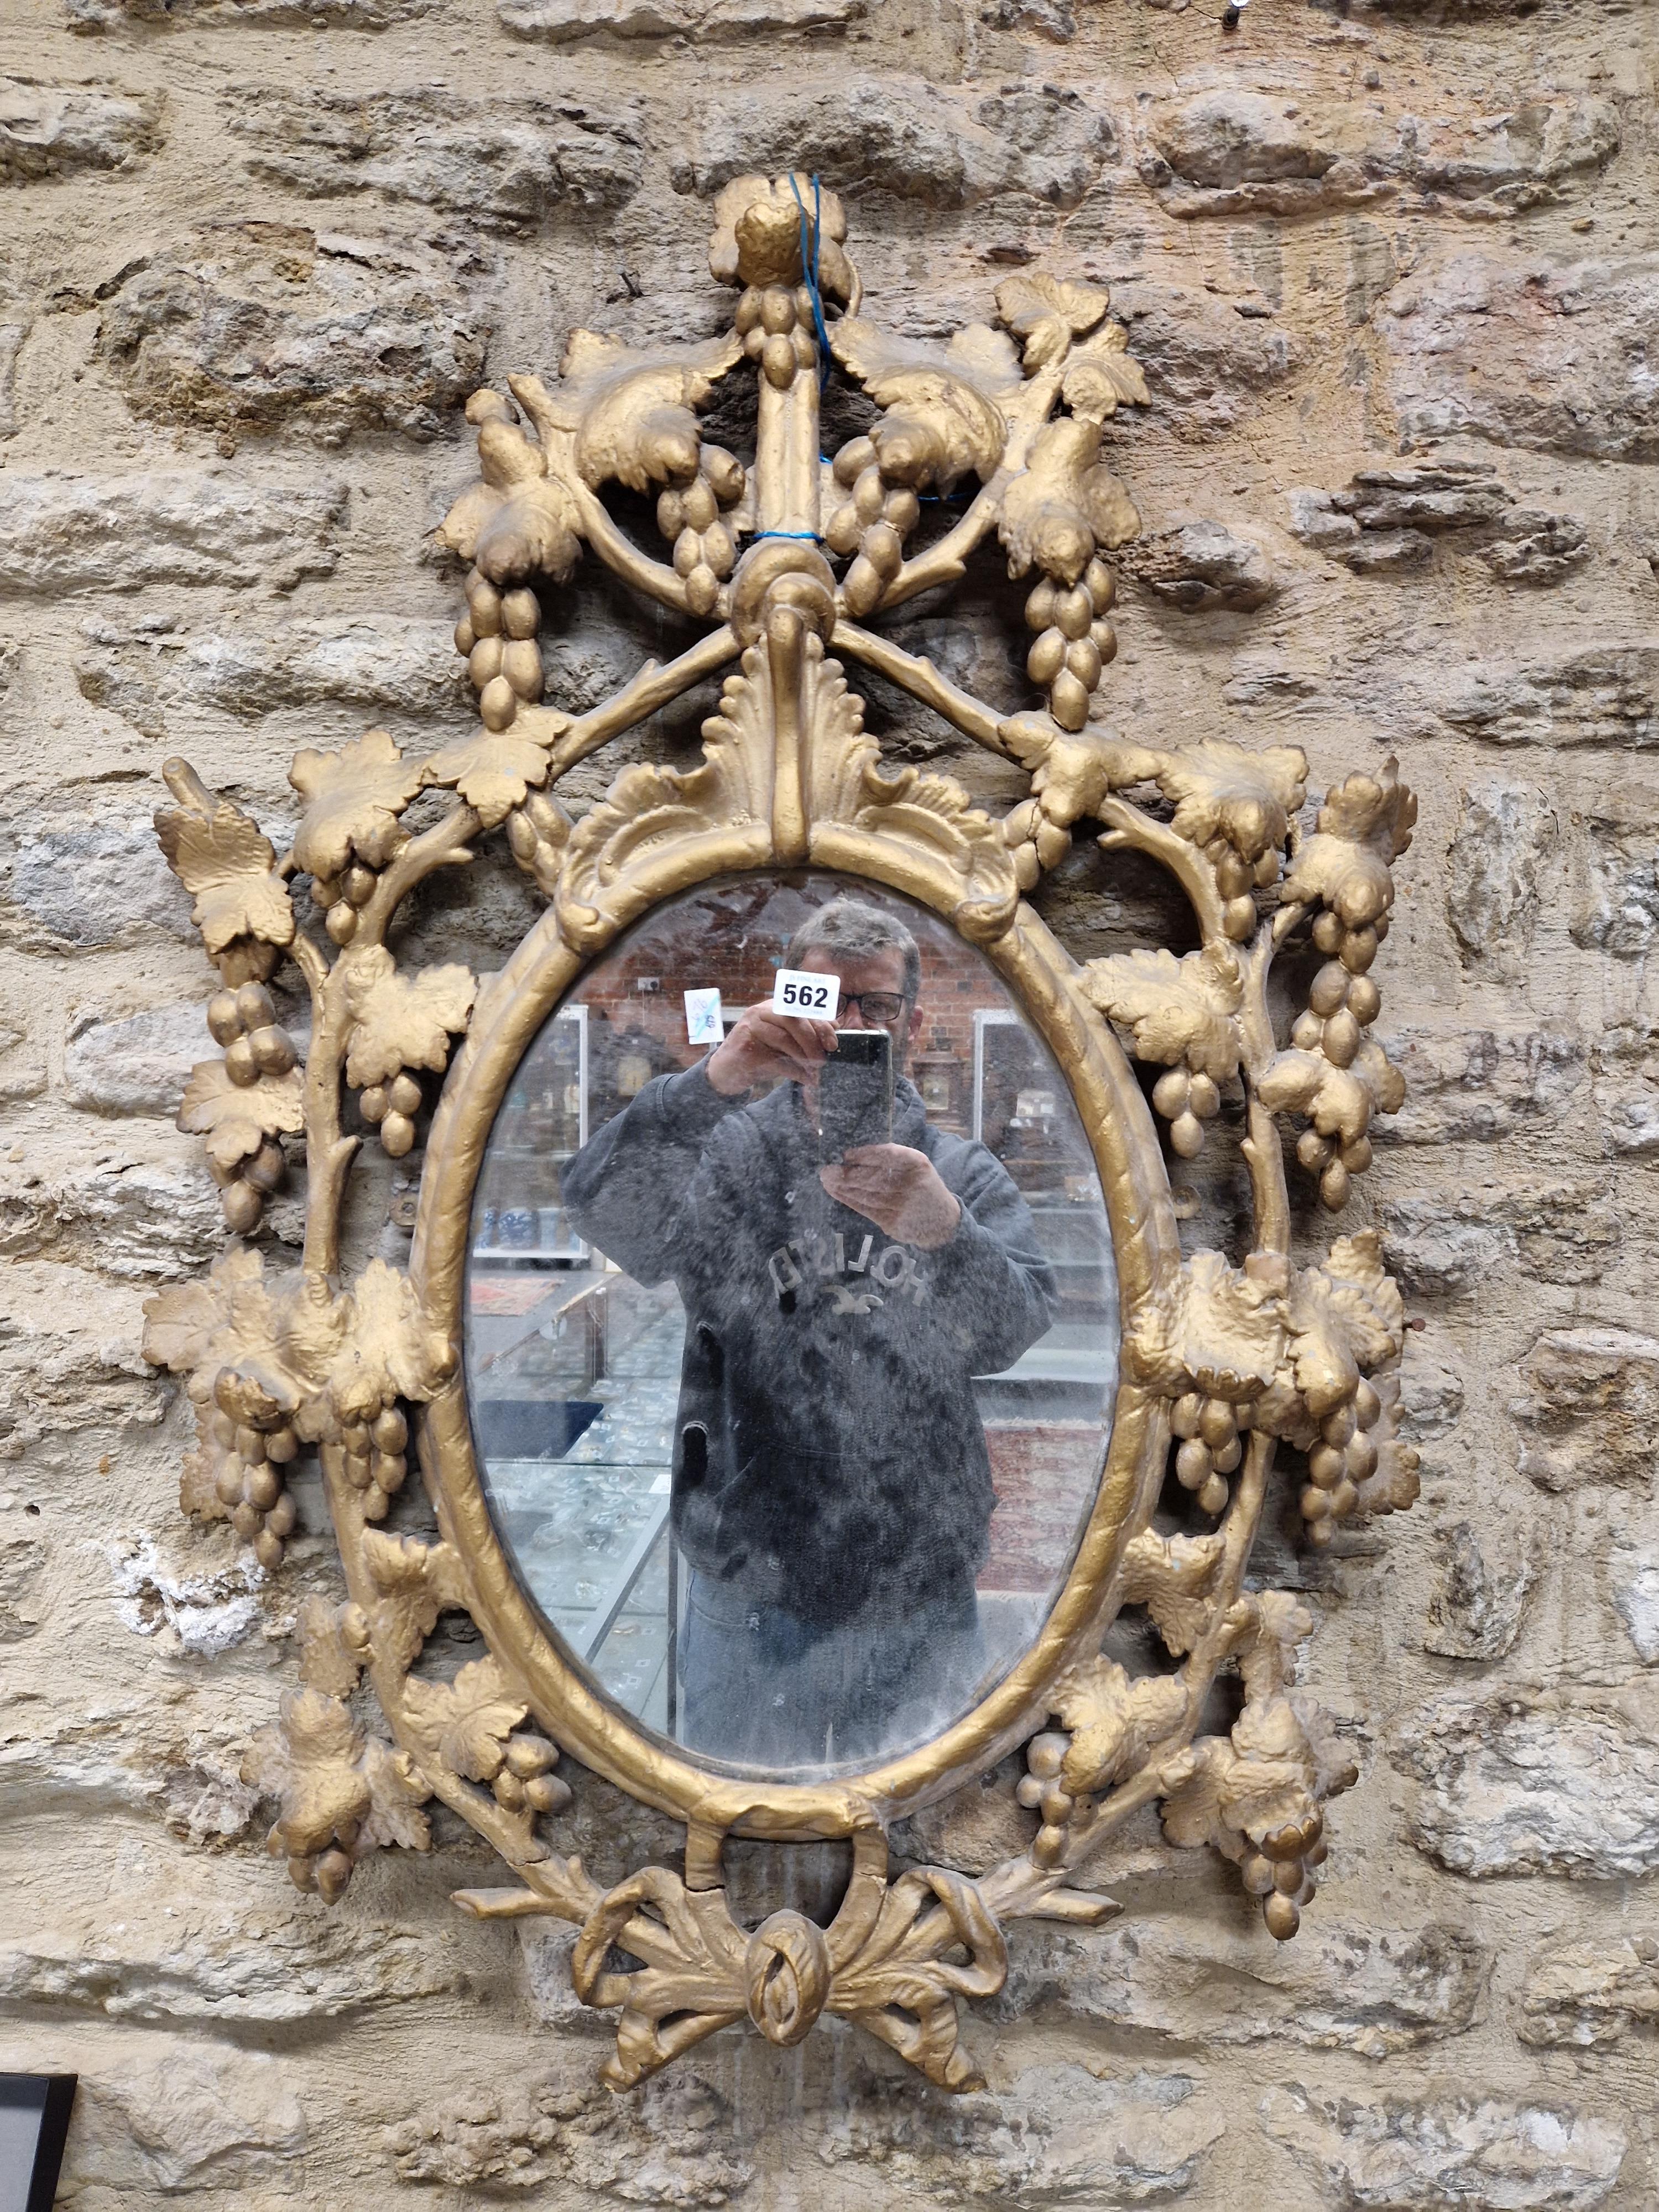 AN OVAL MIRROR IN A LATE 18th C. GILT FRAME PIERCED AND CARVED WITH GRAPE VINES. 95 x 64cms. - Image 11 of 12